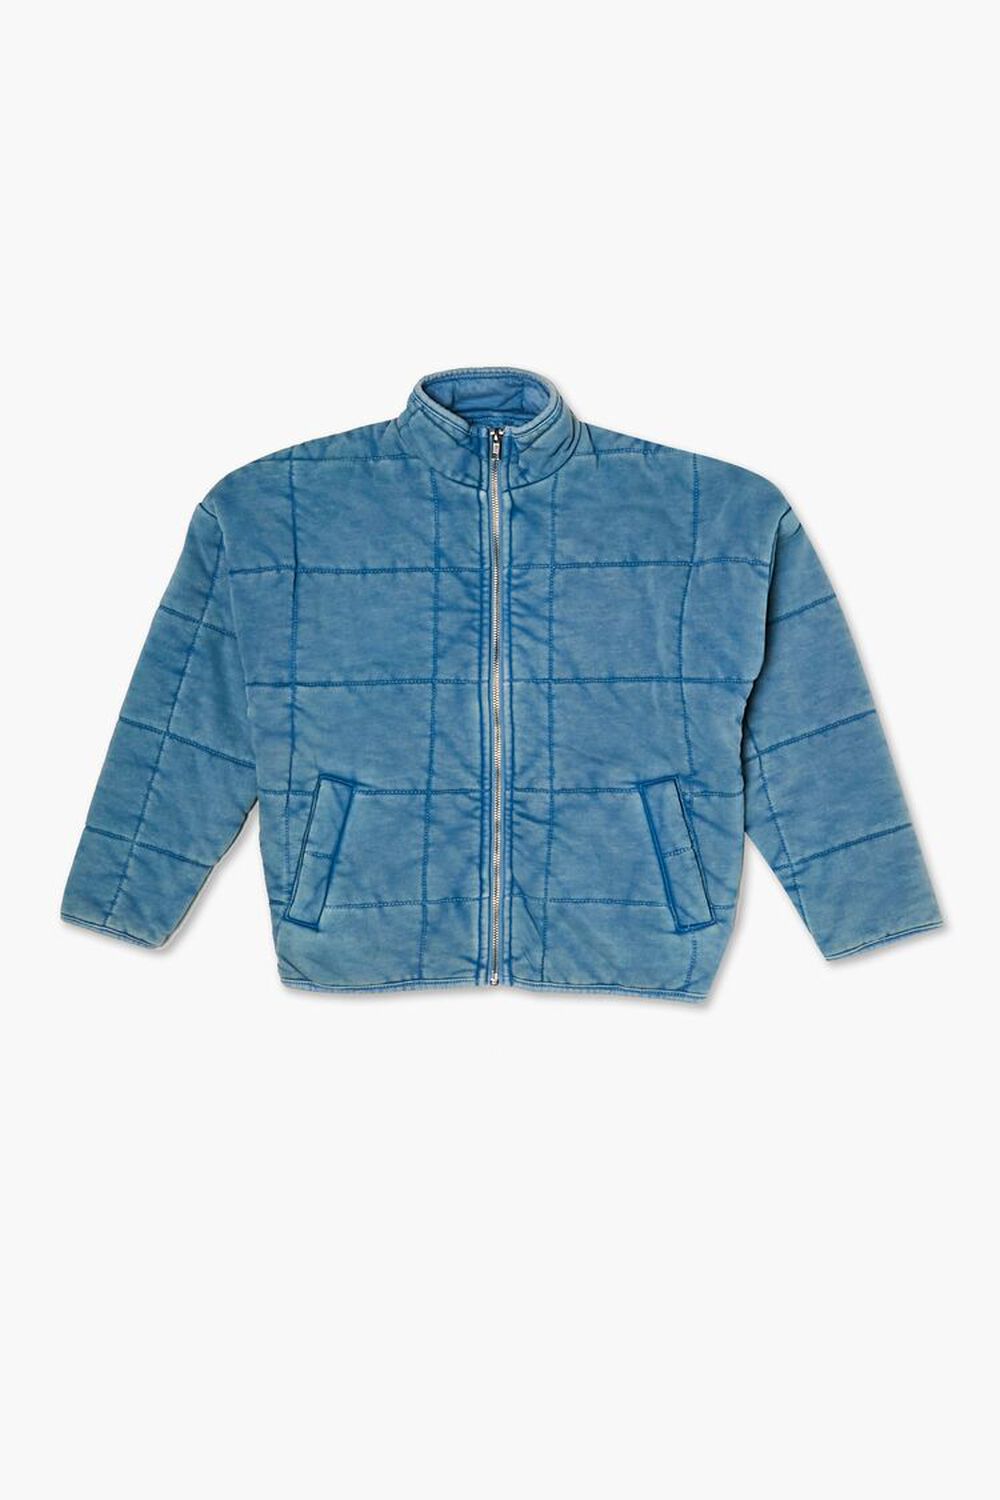 TEAL Kids Quilted Zip-Up Jacket (Girls + Boys), image 1